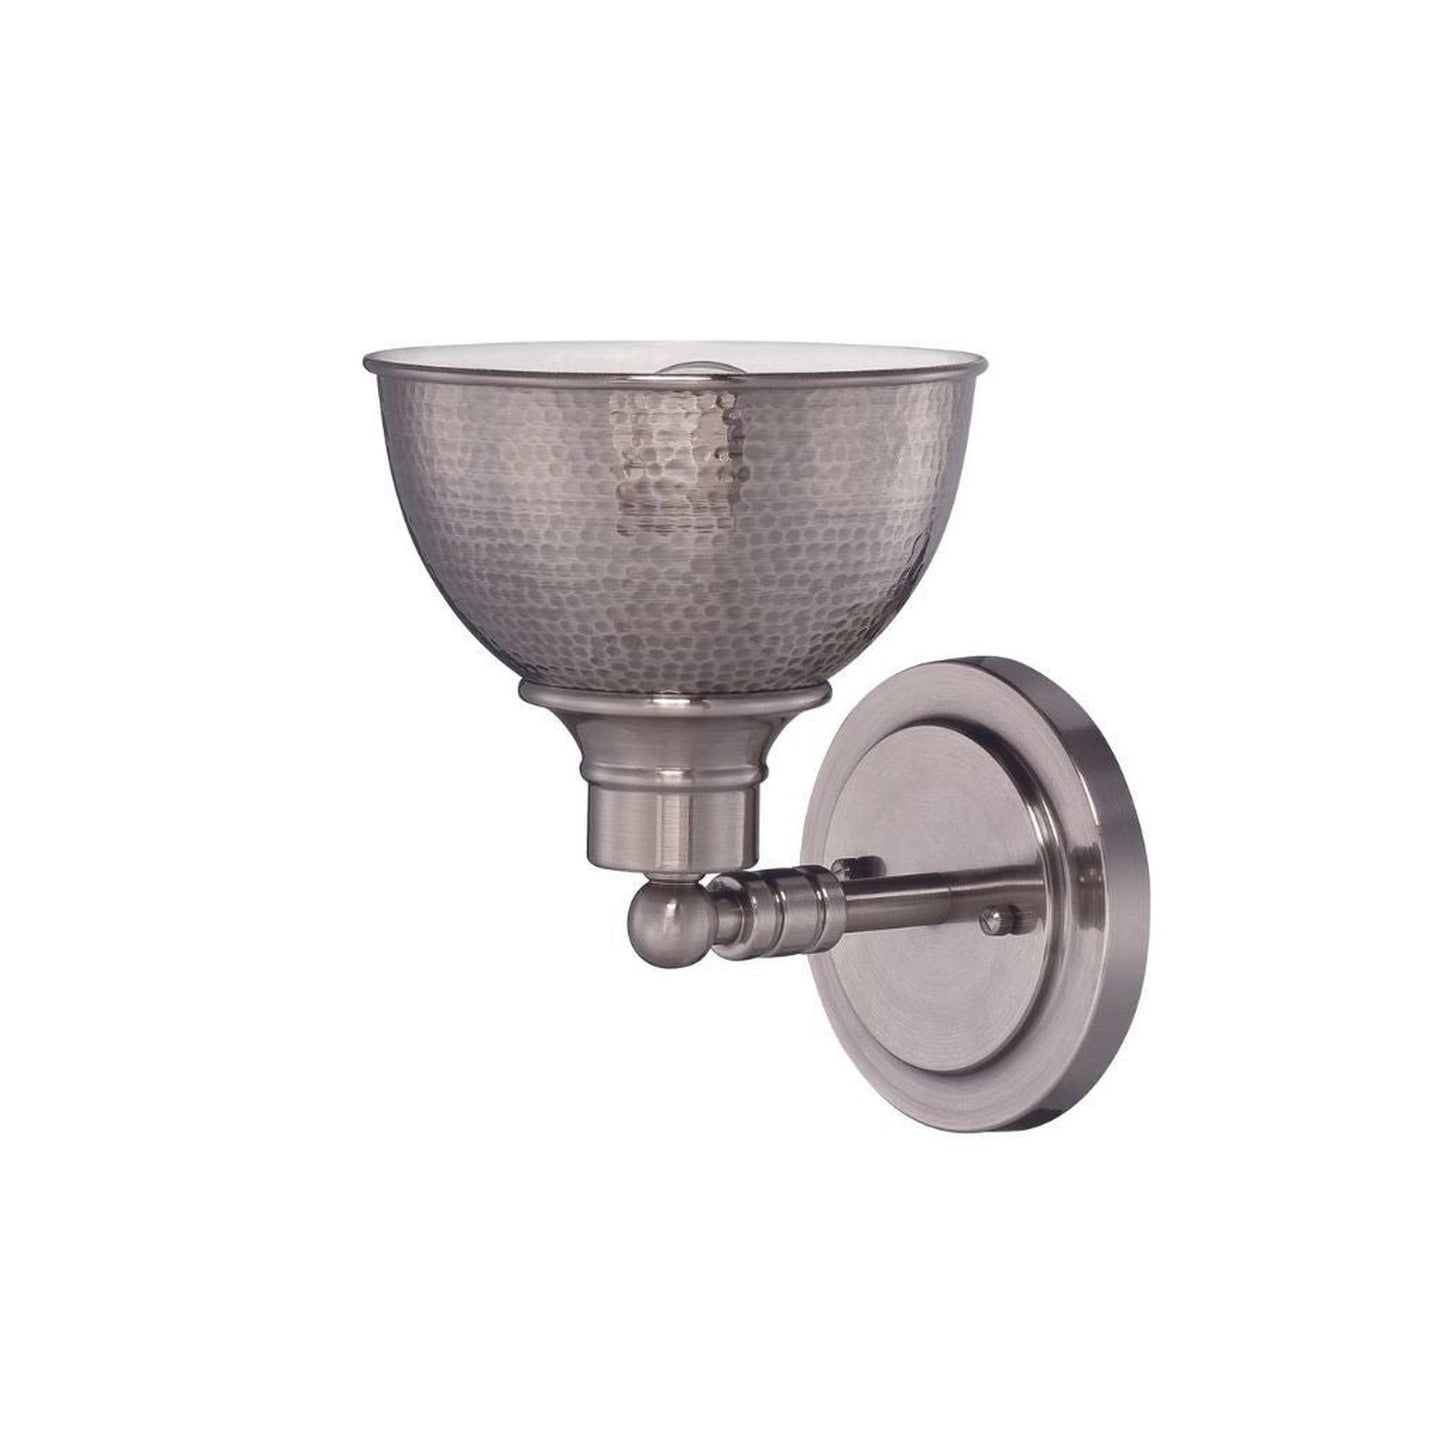 Craftmade Timarron 8" x 10" 1-Light Antique Nickel Wall Sconce With Hammered Metal Shade